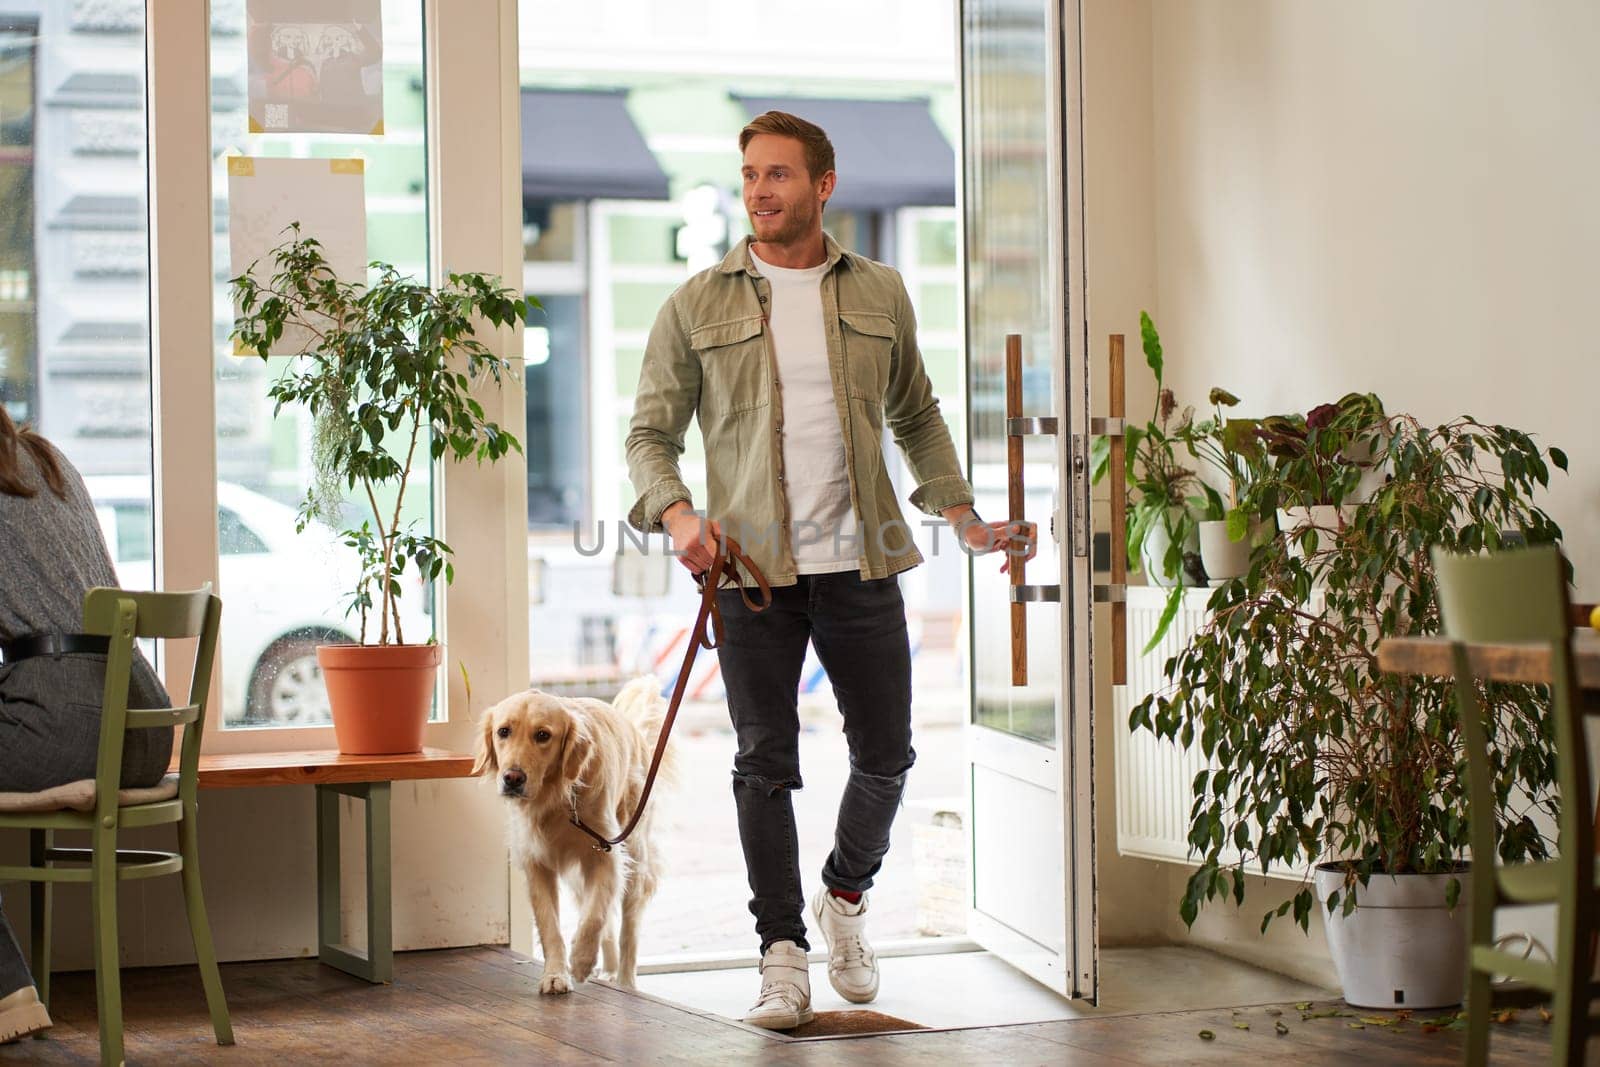 Portrait of handsome smiling young man, walking into the coffee shop with his cute dog, golden retriever on leash. Guy enters pet-friendly cafe.